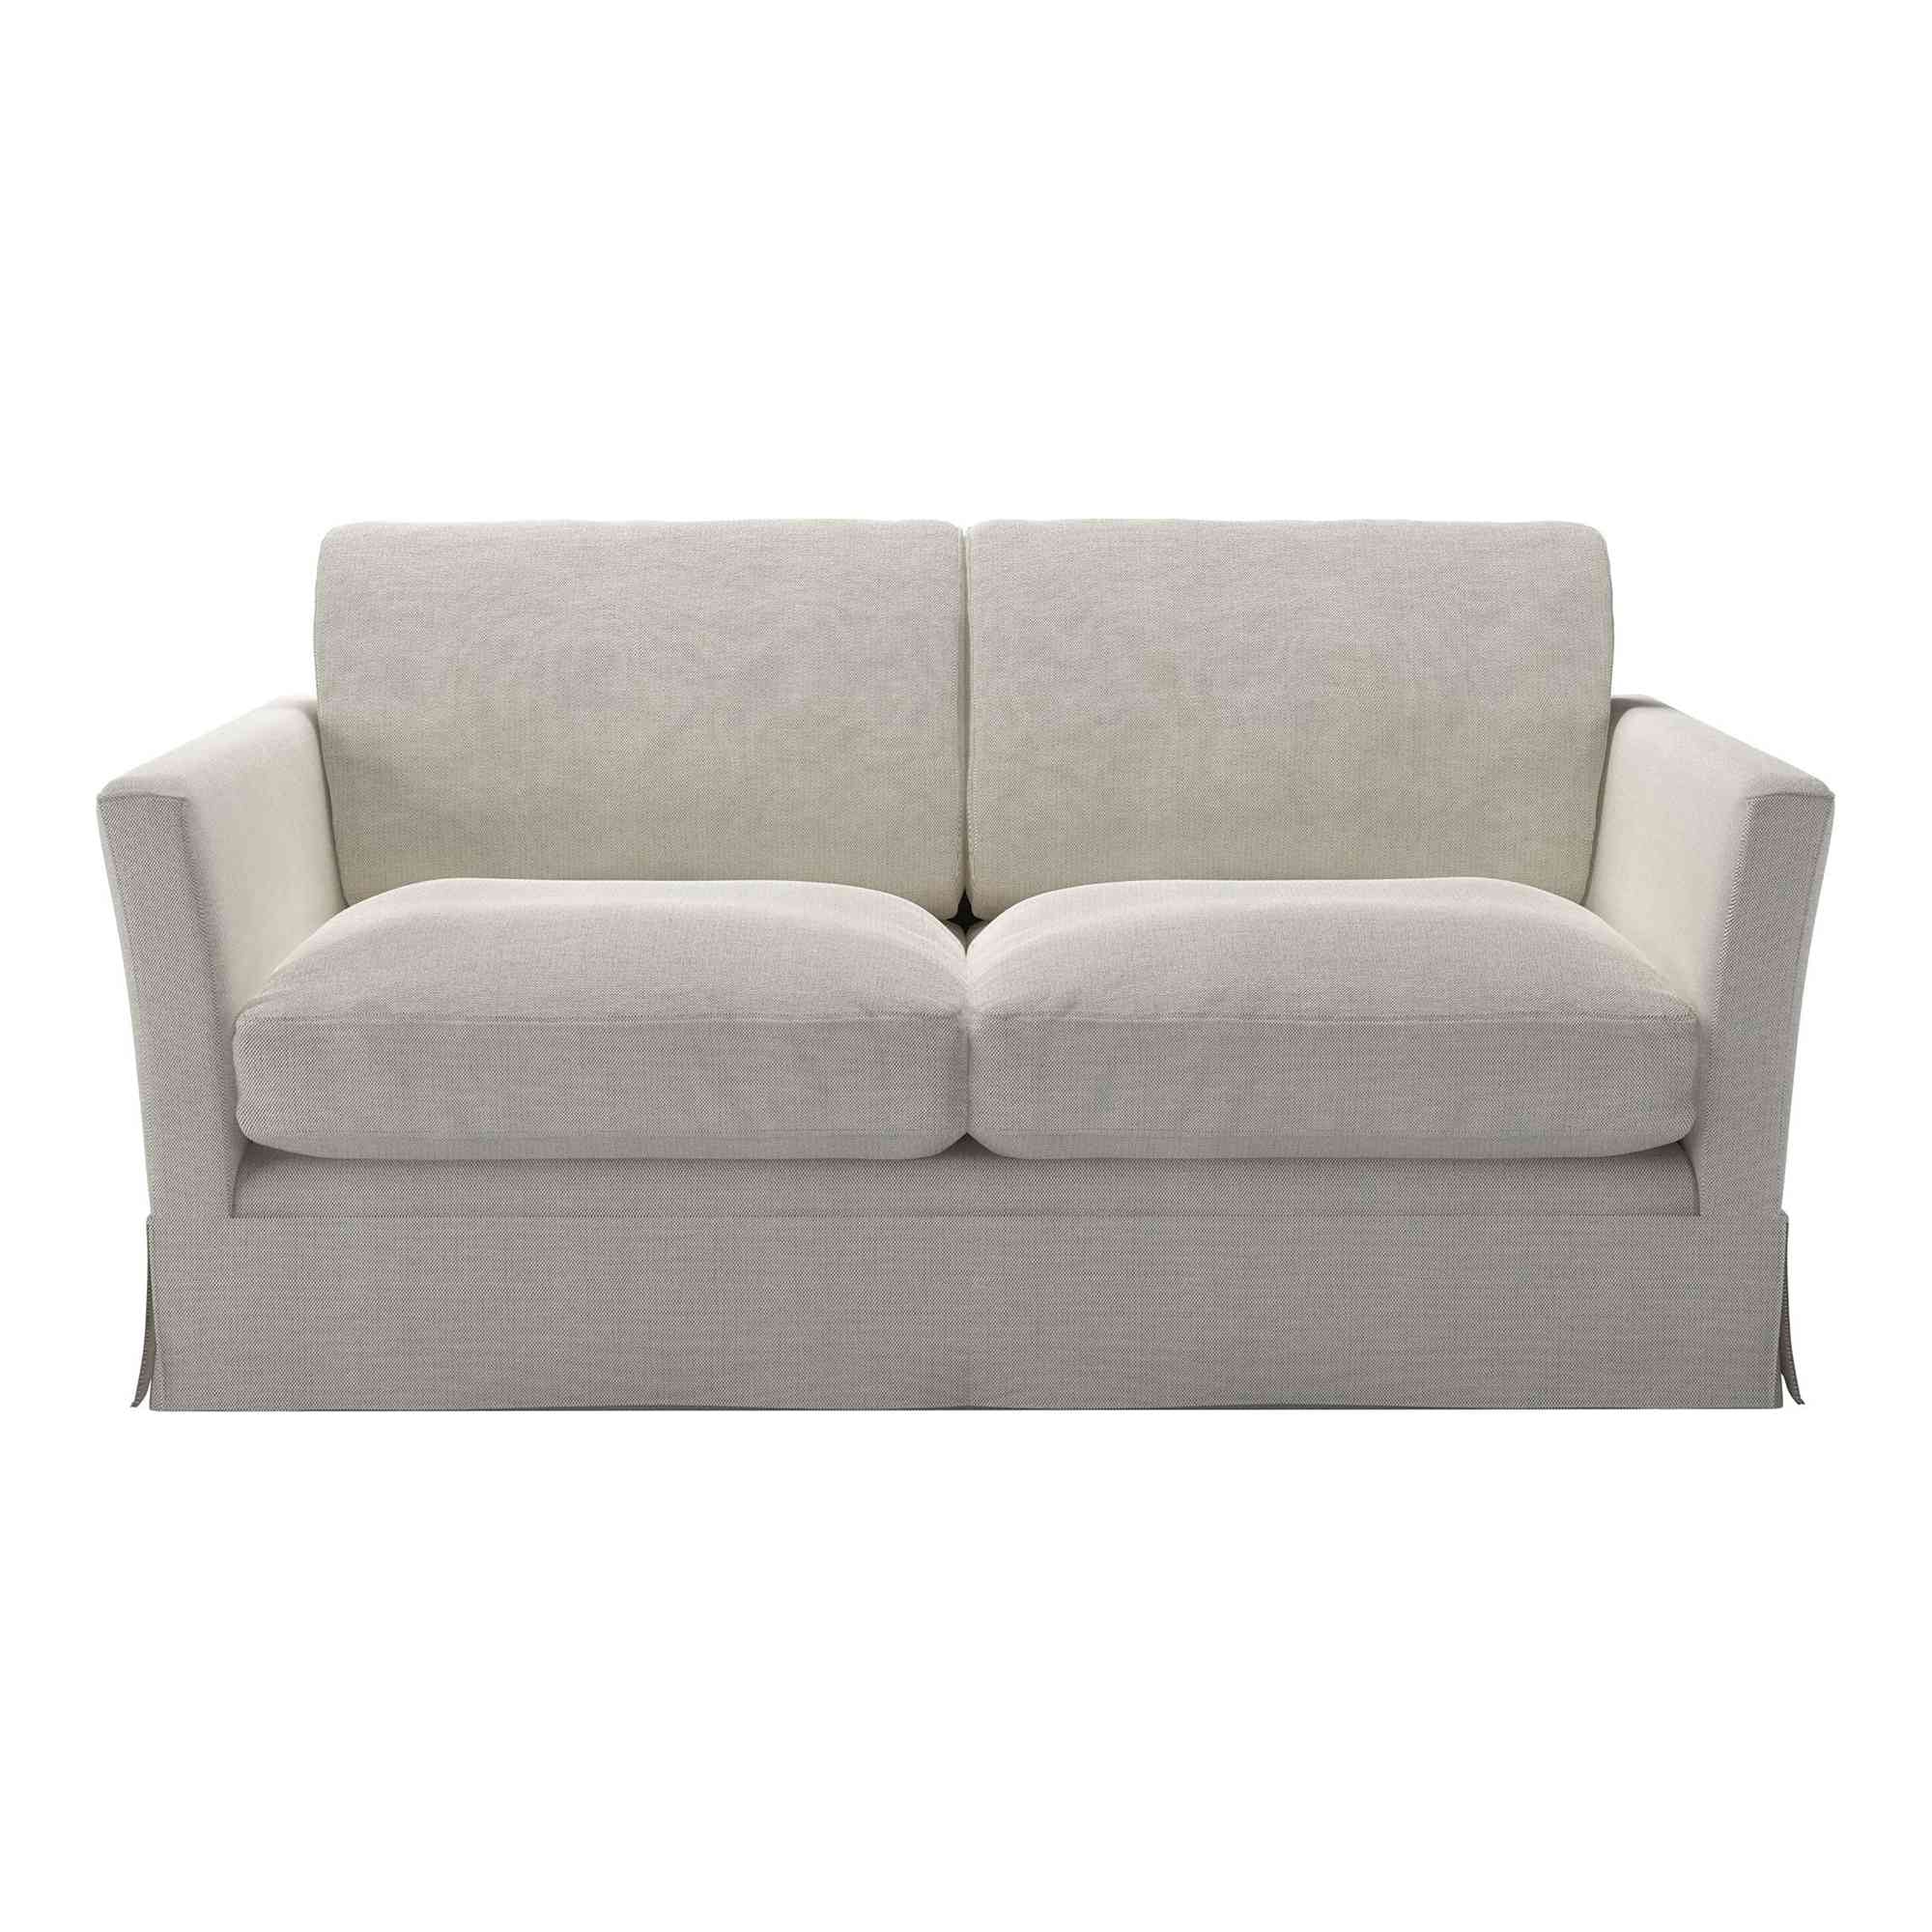 Otto Clay House Basket Weave Sofa - 2 Seater